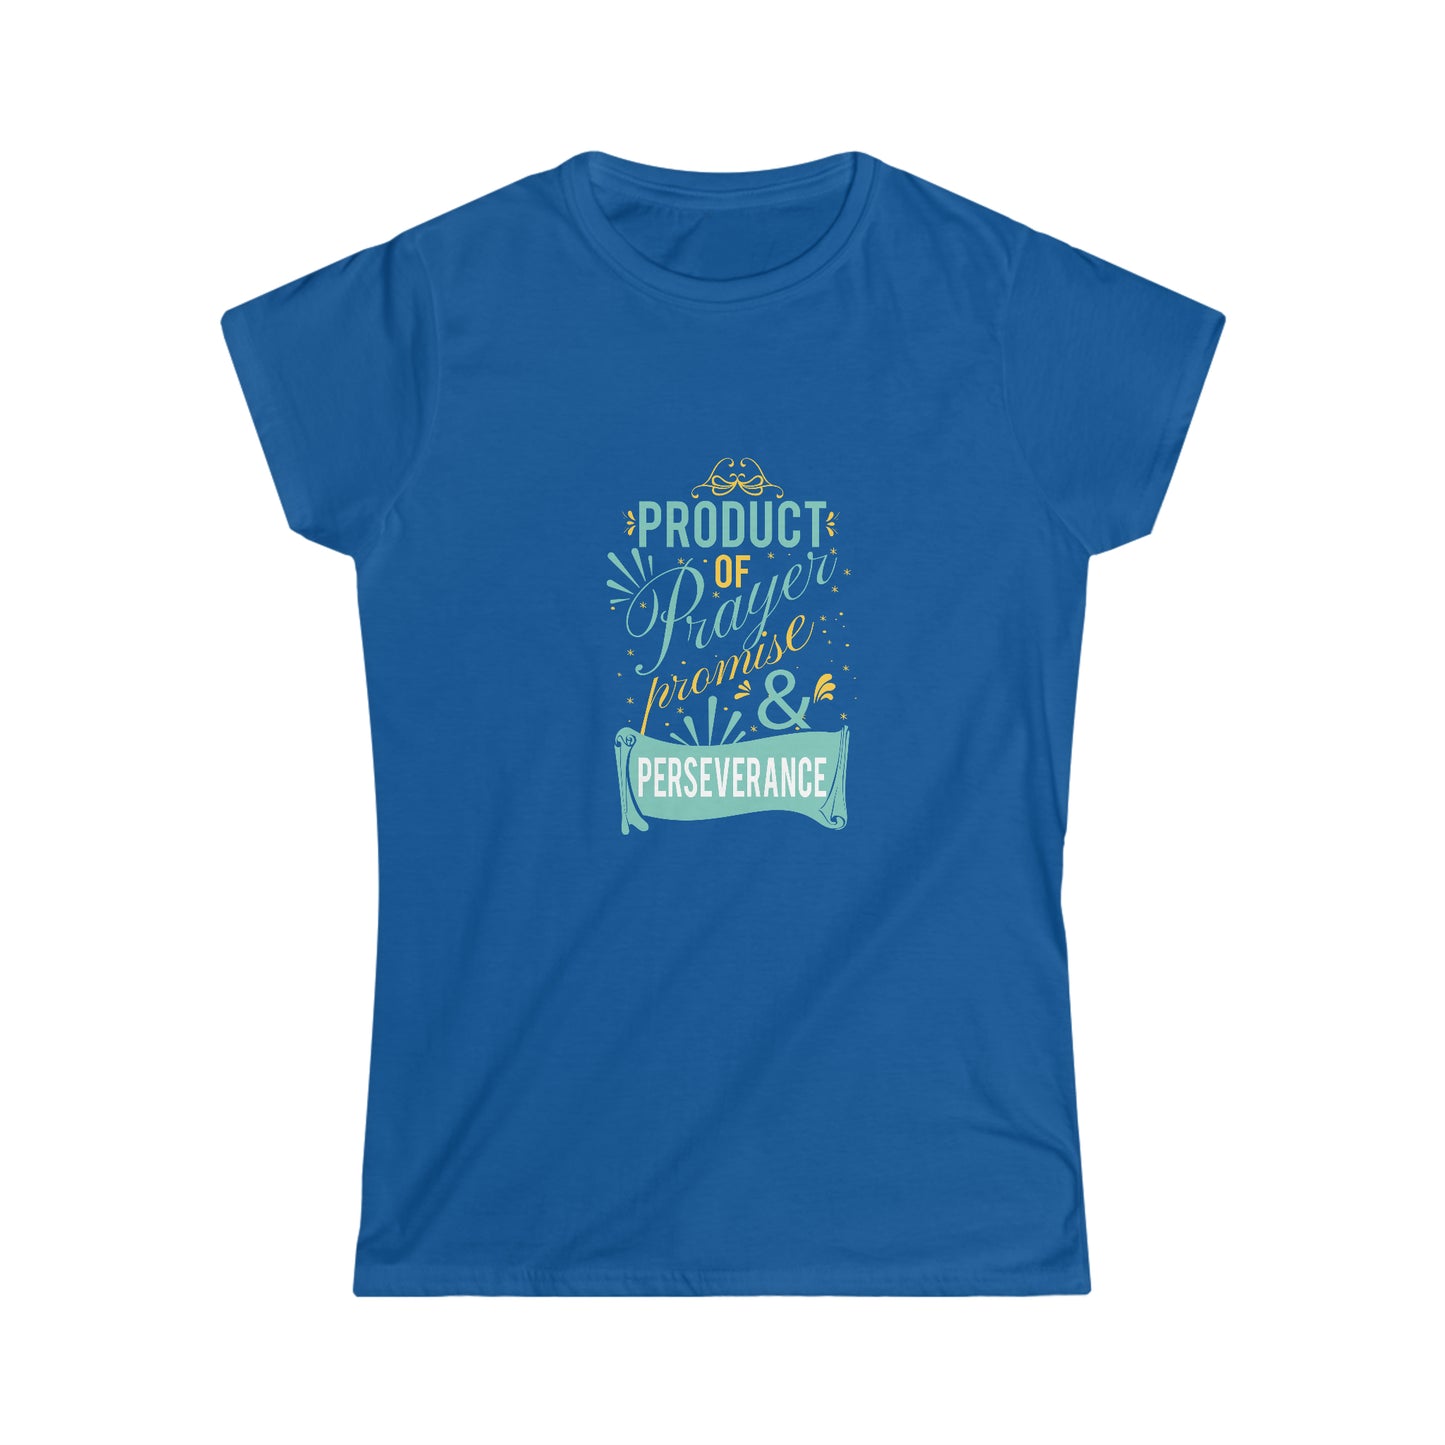 Product of Prayer, Promise, and Perseverance Women's T-shirt